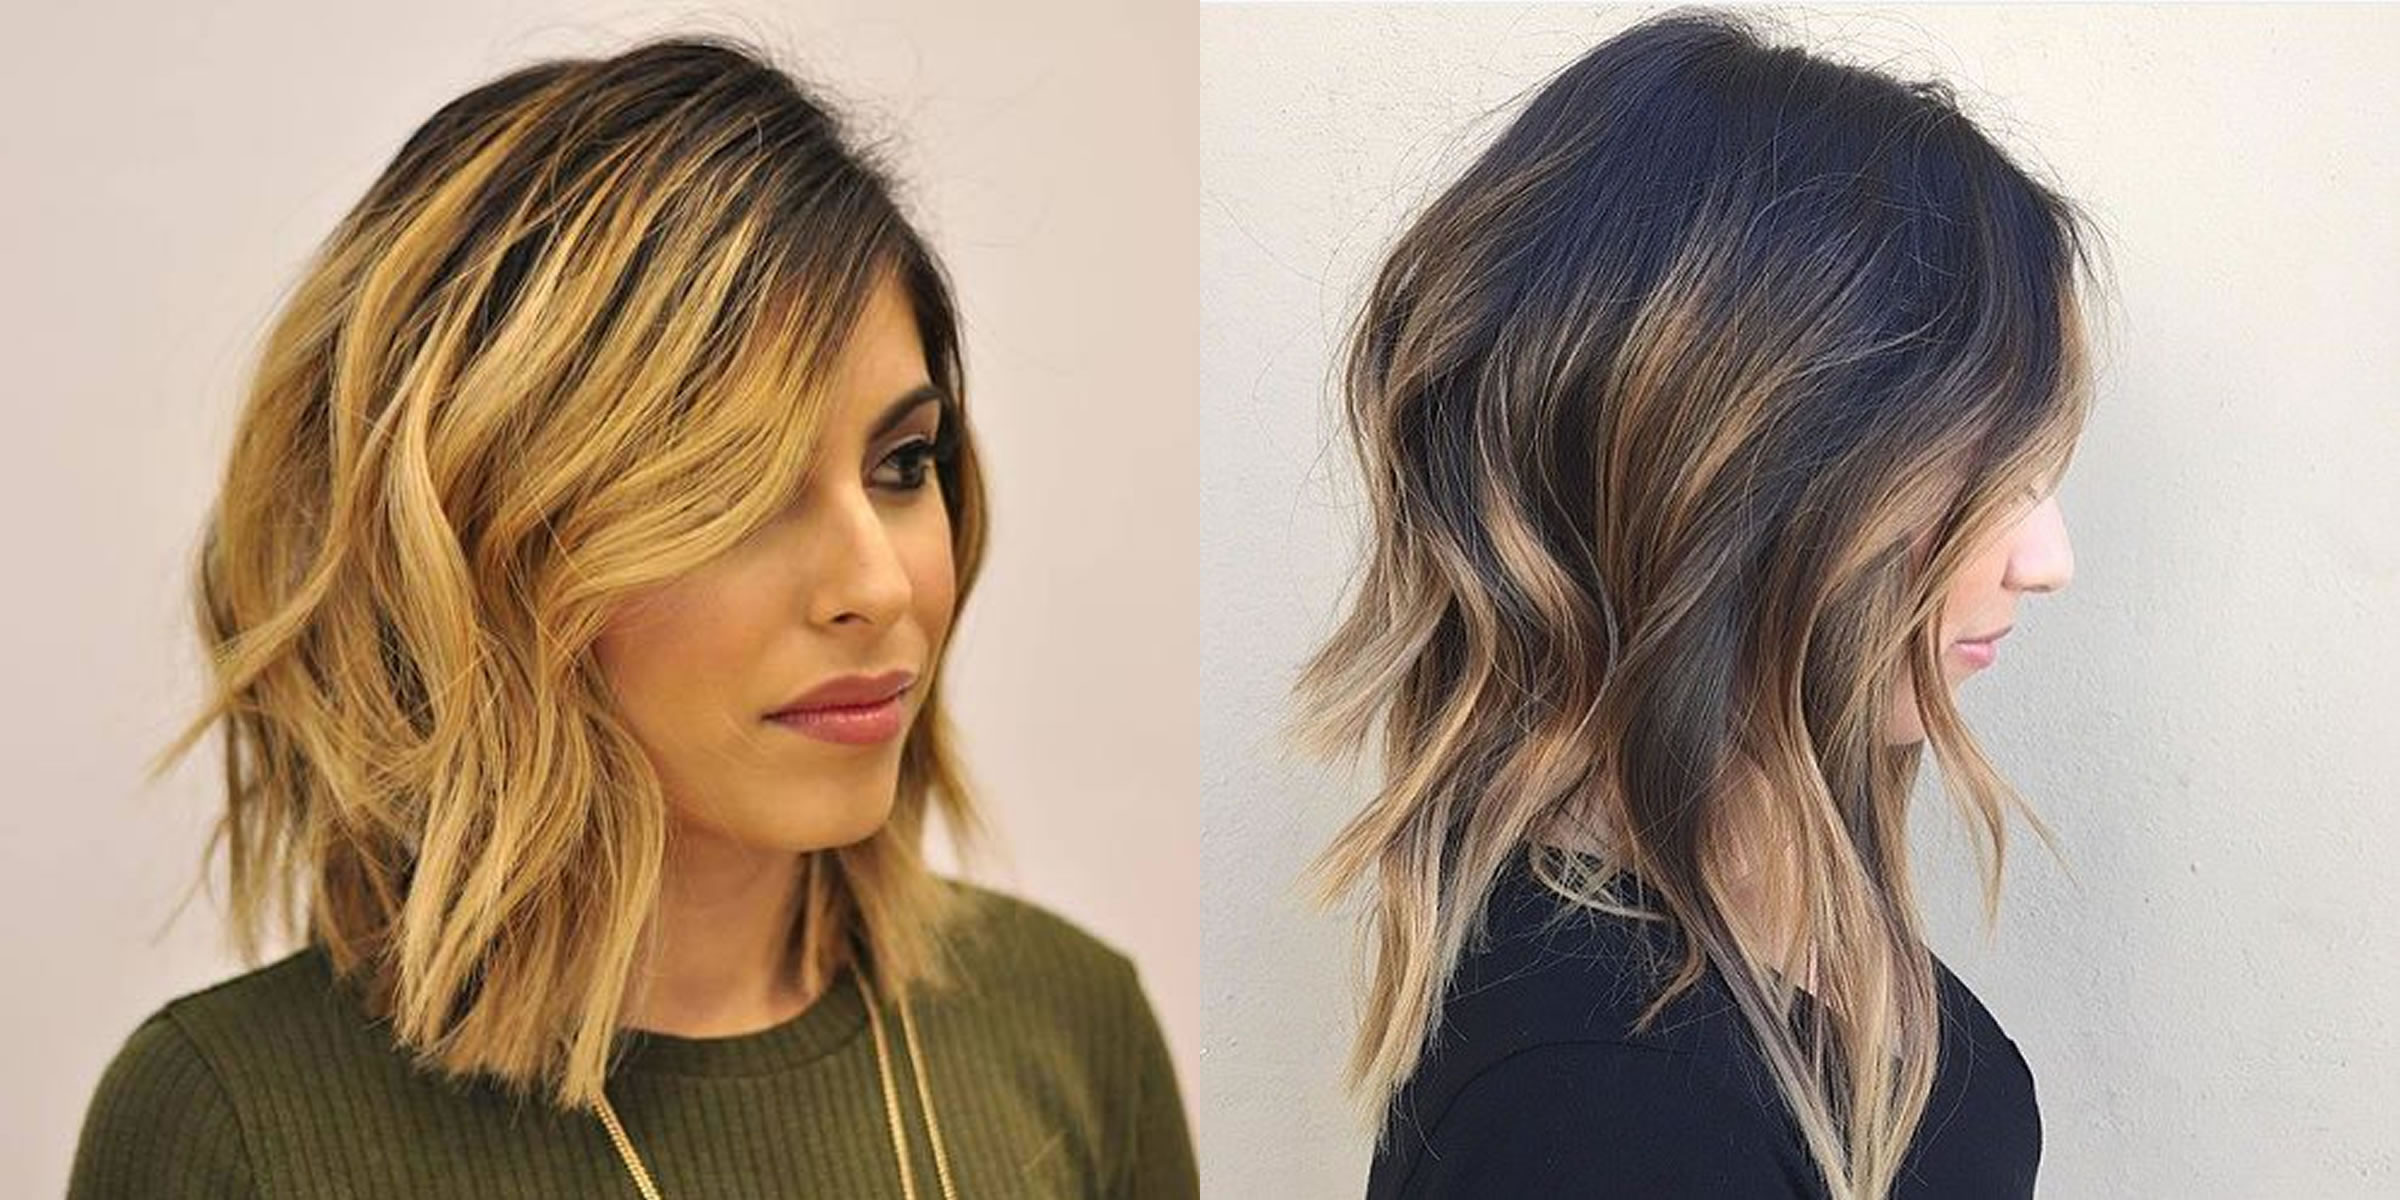 Hairstyles 2019 Female
 60 Best Long Bob Hairstyles and Hair Colors Balayage